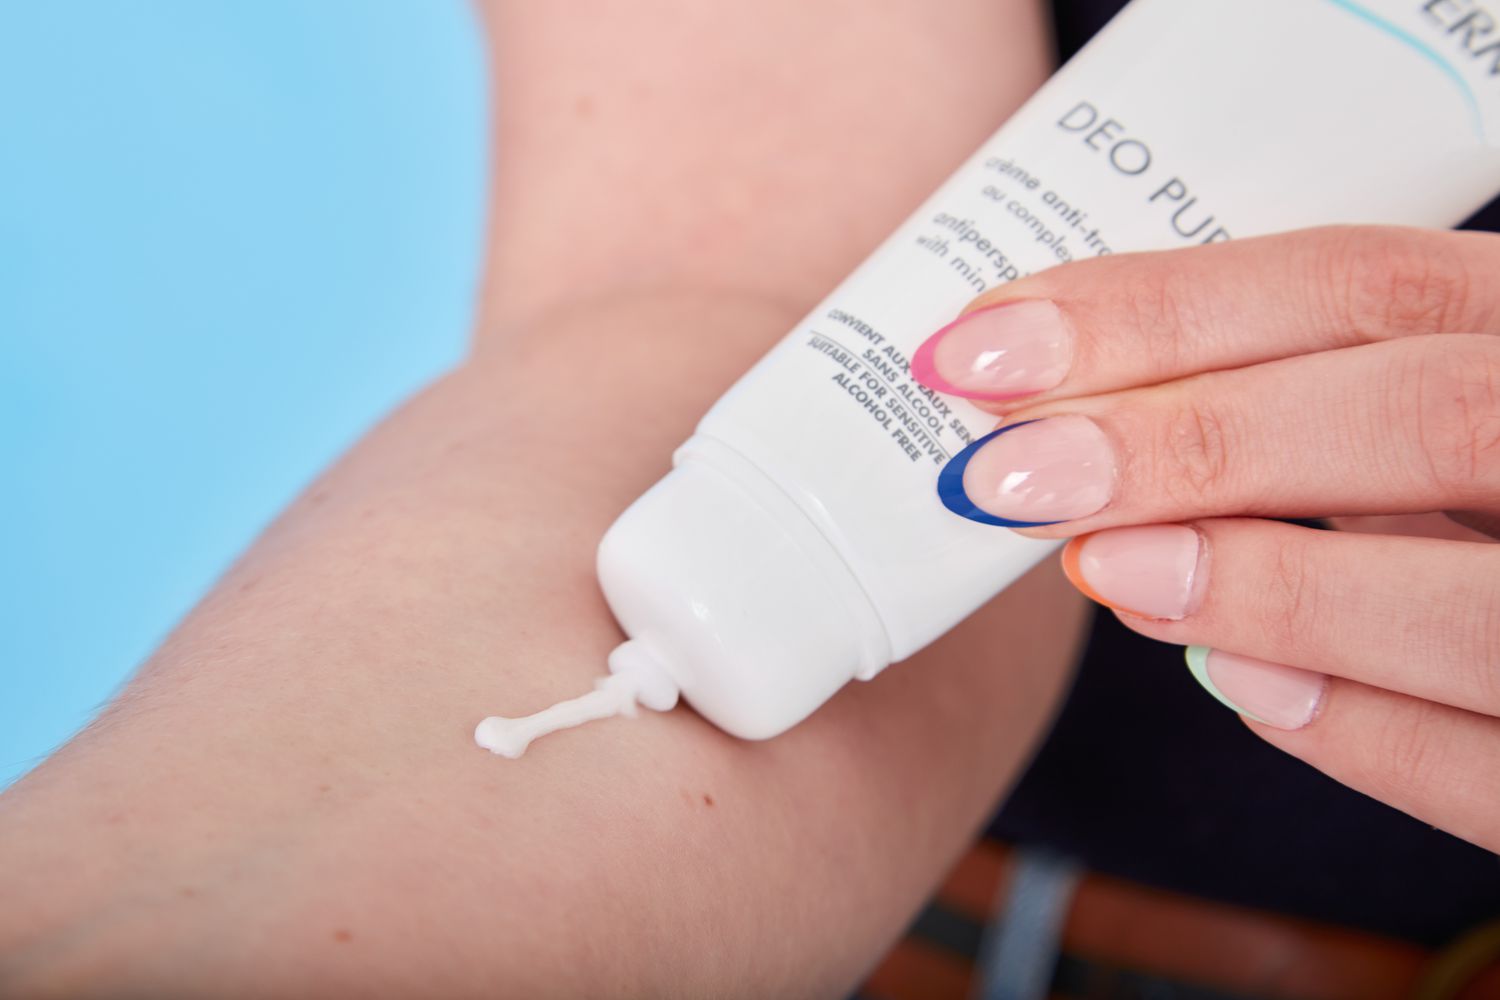 Hand applying Biotherm Deo Pure Antiperspirant Cream to forearm